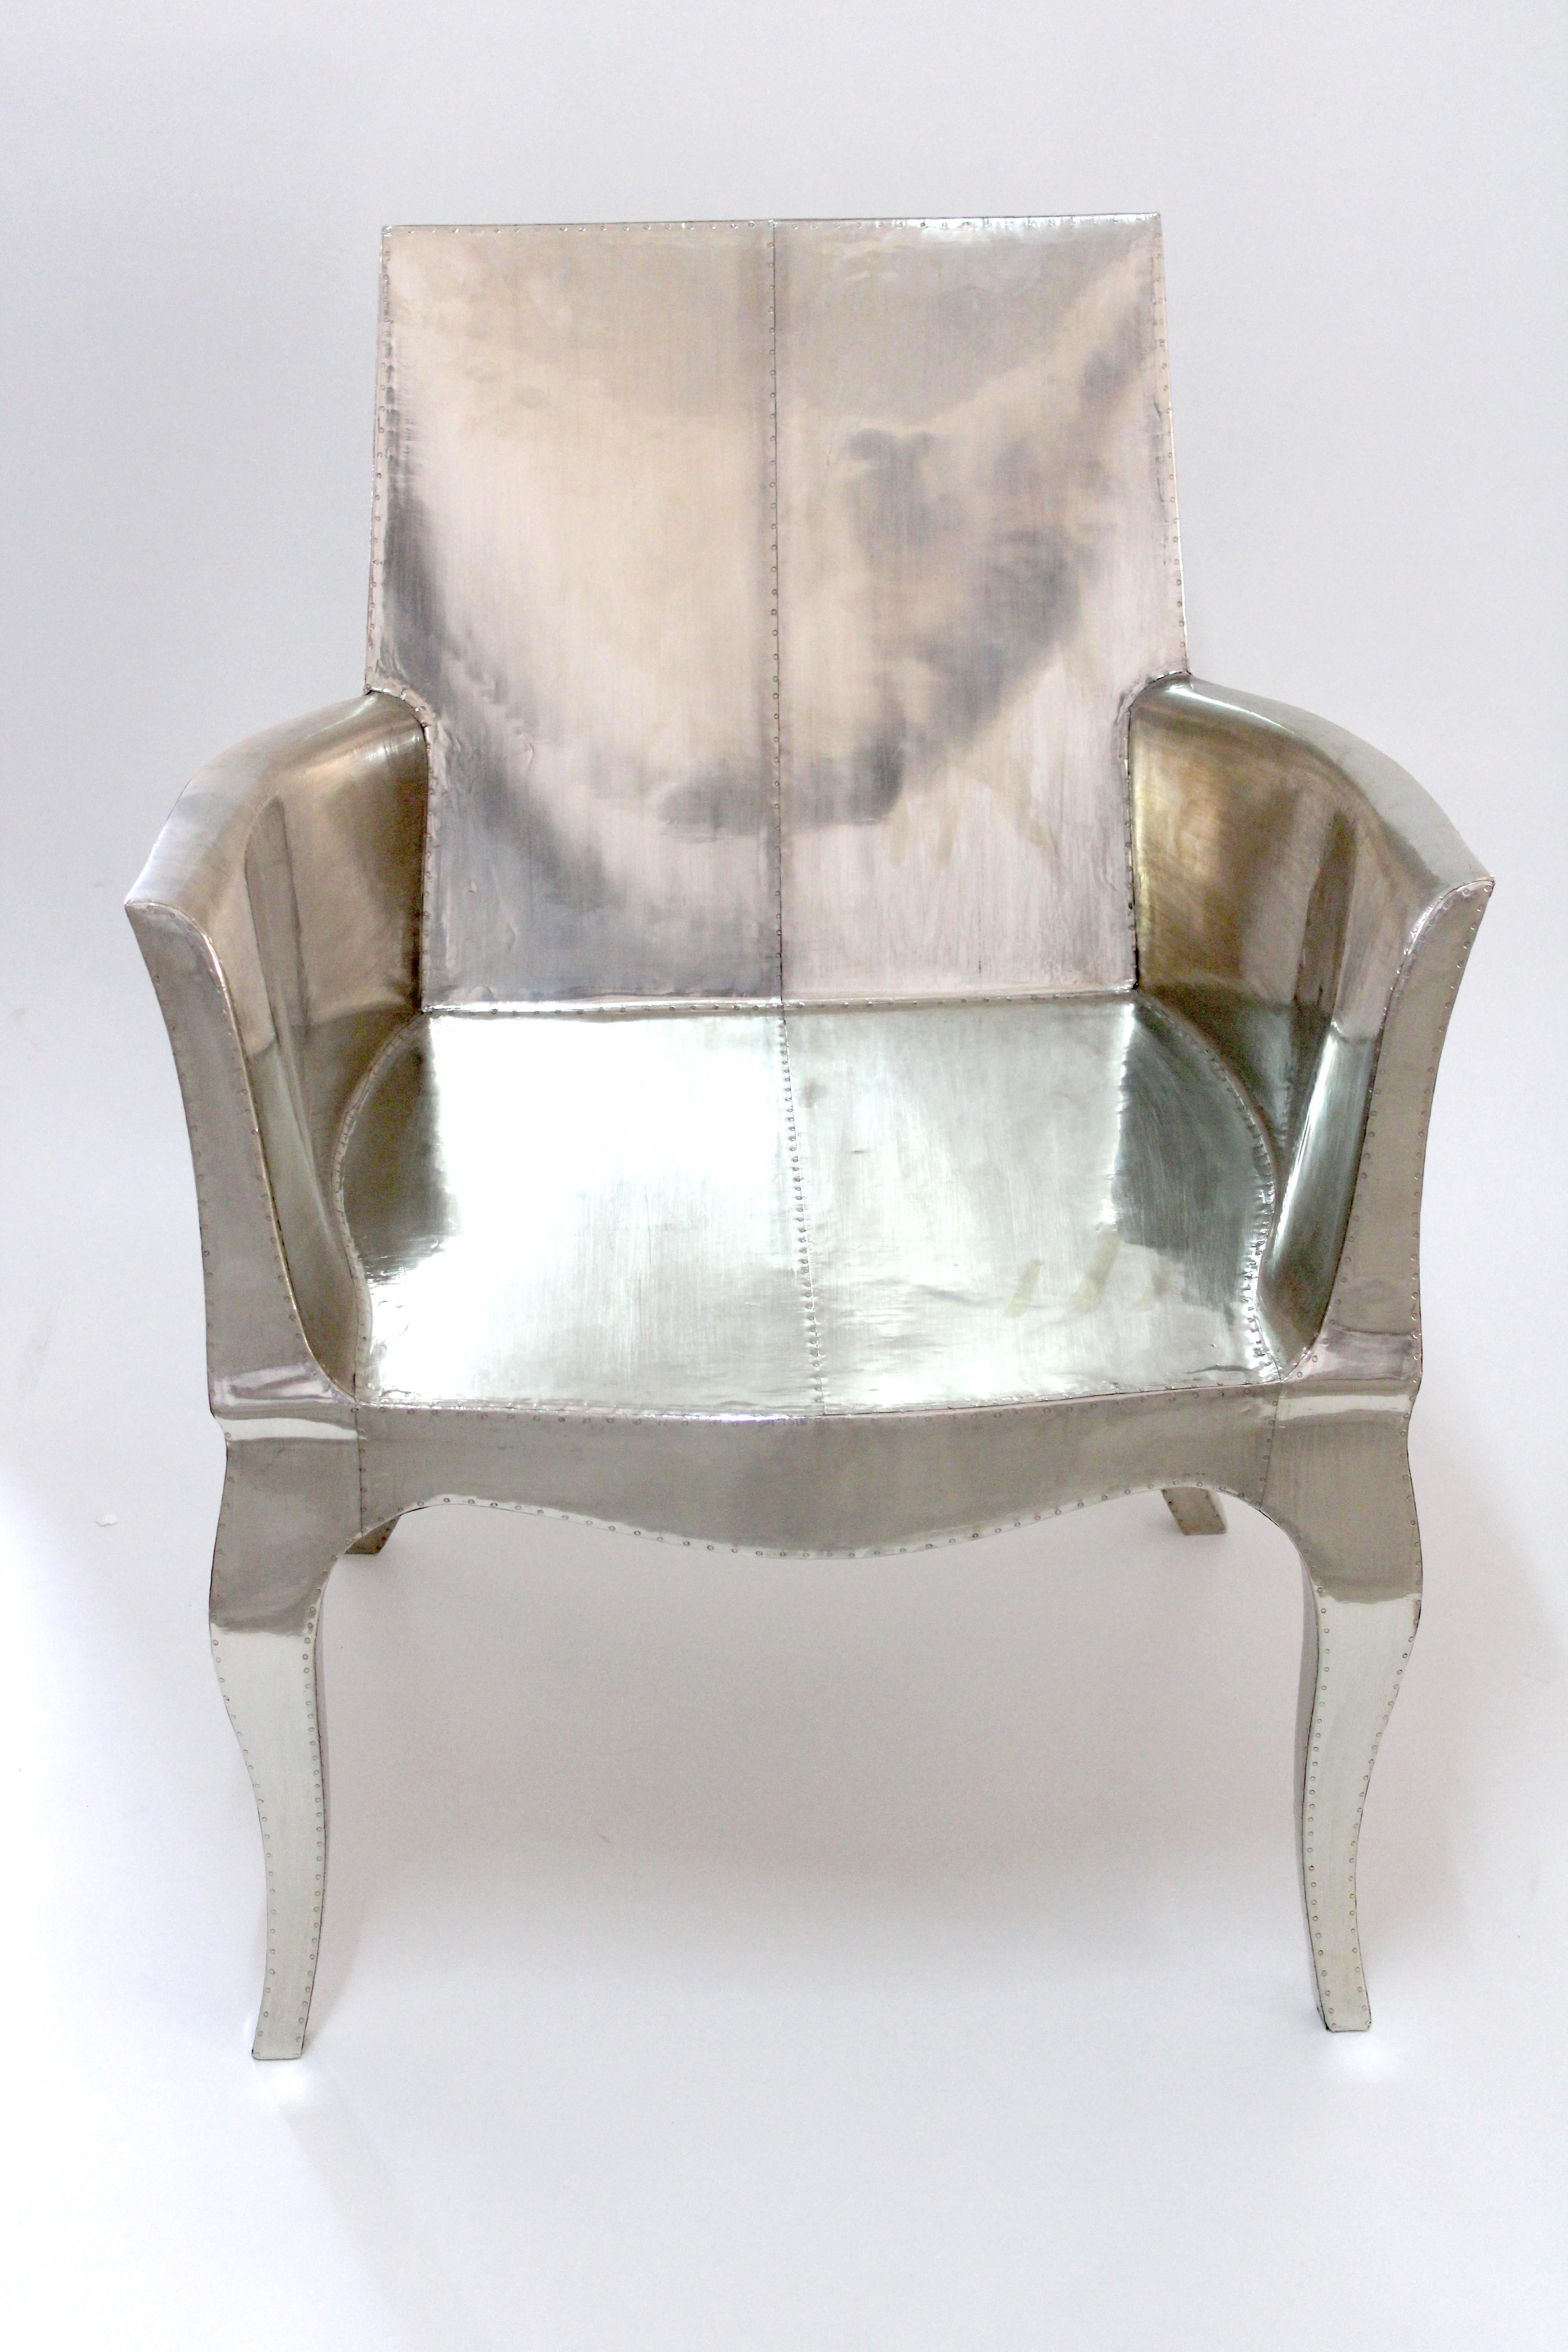 Sheet Metal Art Deco Lounge Chair in Smooth White Bronze by Paul Mathieu for S. Odegard For Sale